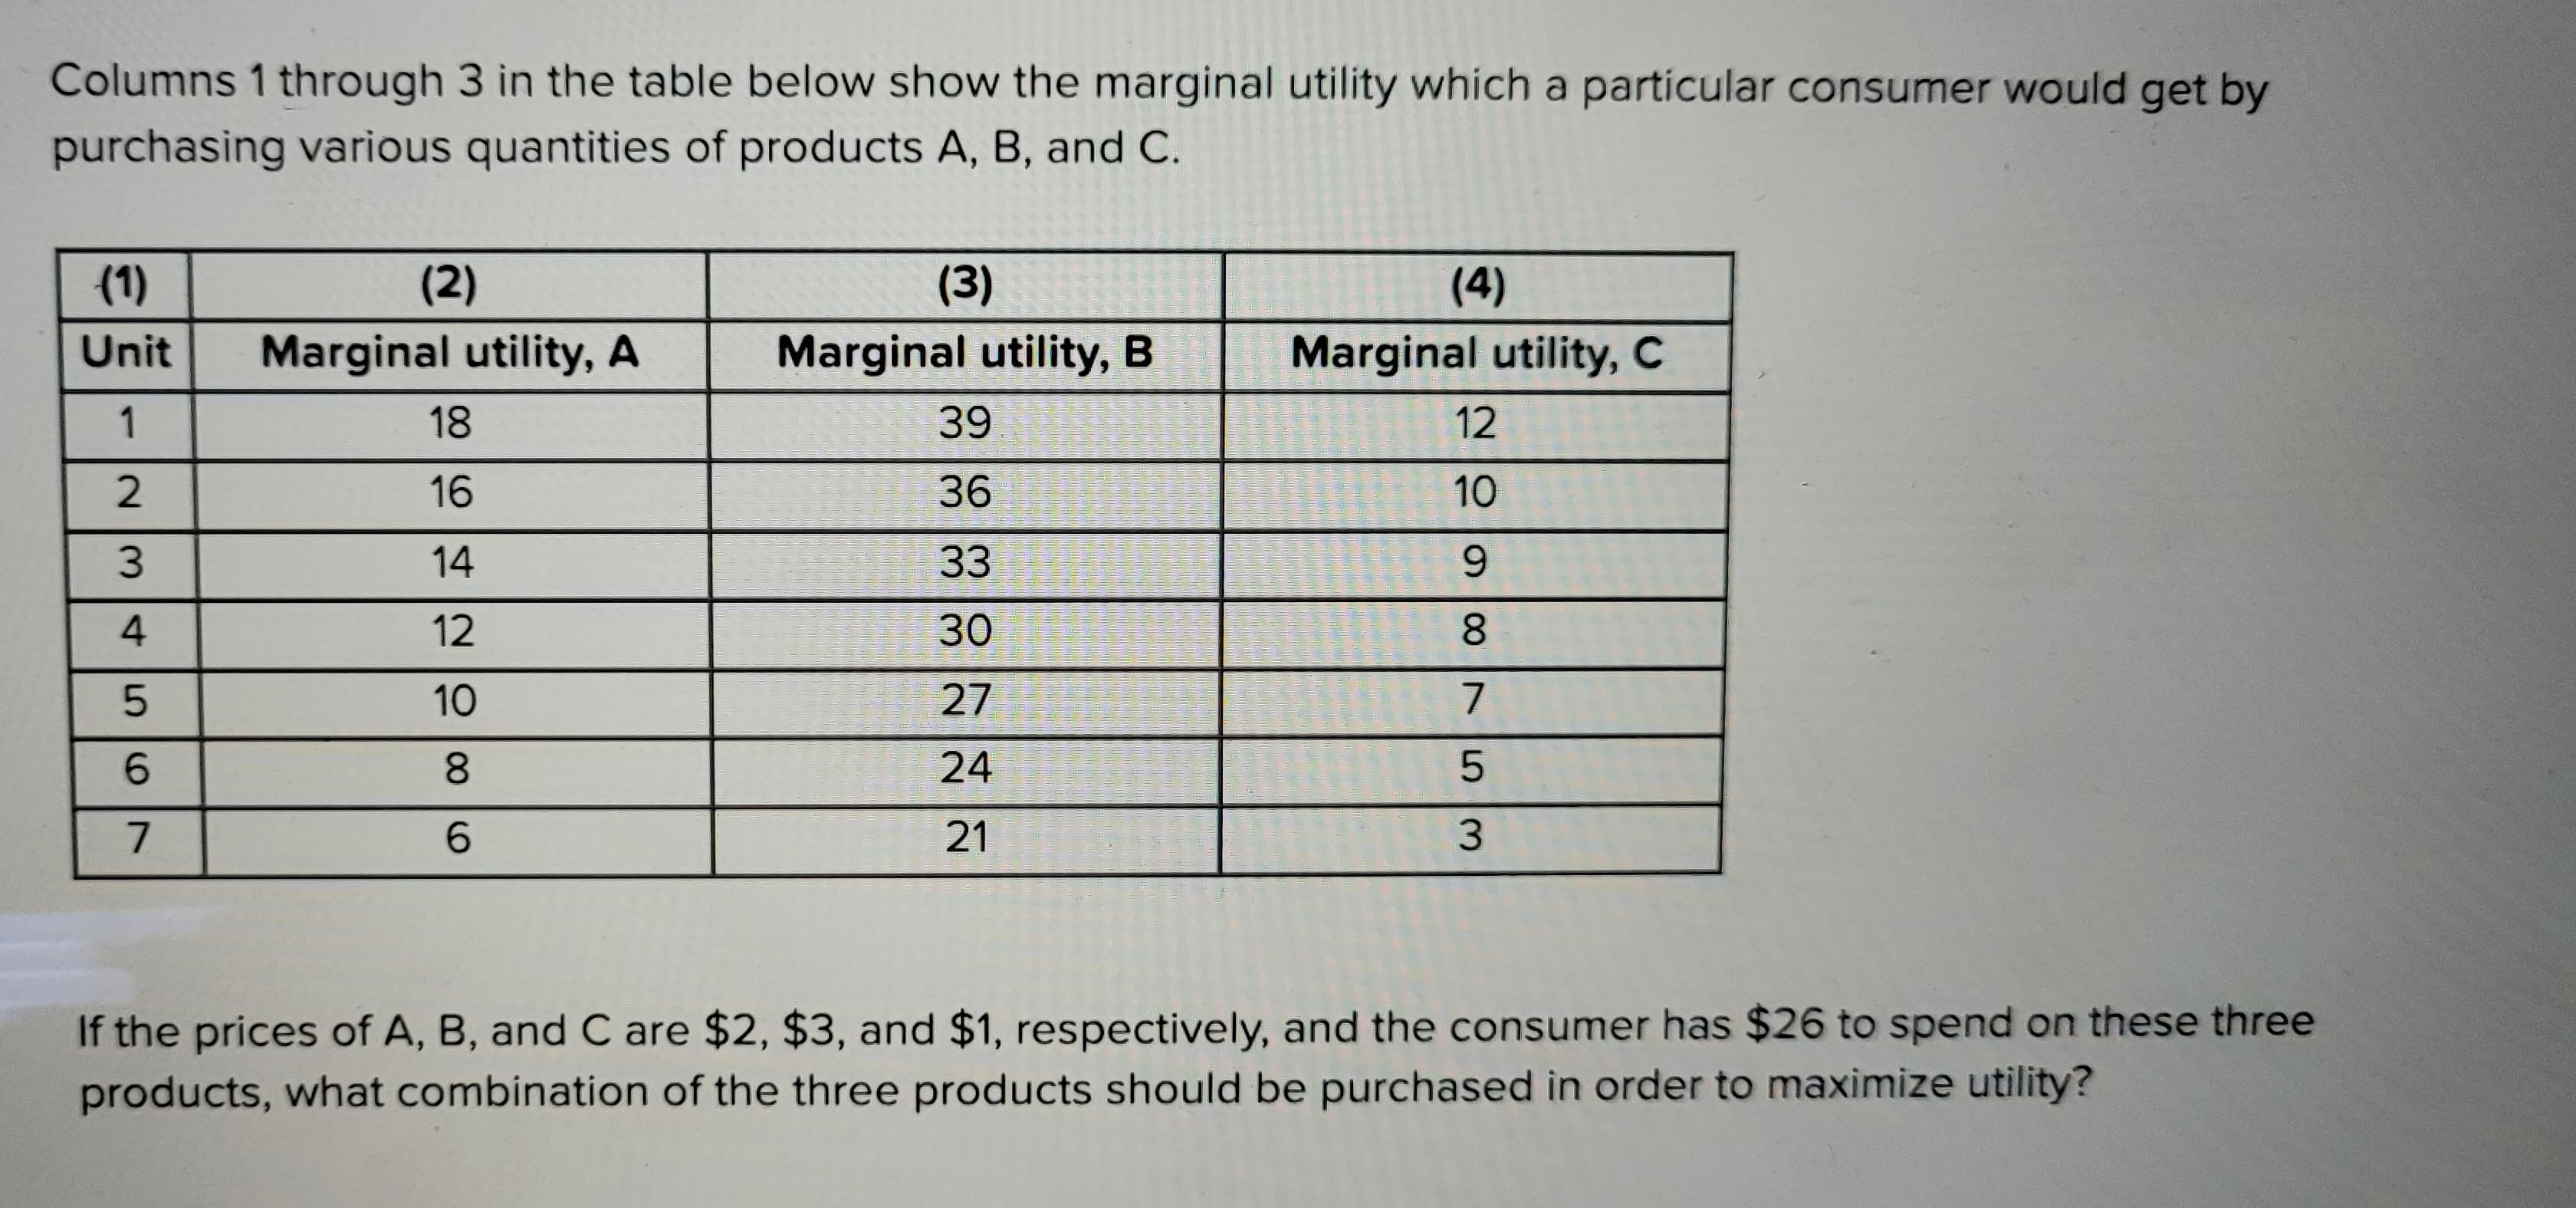 Columns 1 through 3 in the table below show the marginal utility which a particular consumer would get by
purchasing various quantities of products A, B, and C.
(1)
Unit
1
2
696 AWN
3
4
5
7
(2)
Marginal utility, A
18
16
14
12
10
8
6
(3)
Marginal utility, B
39
36
33
30
27
24
21
(4)
Marginal utility, C
12
10
053
If the prices of A, B, and C are $2, $3, and $1, respectively, and the consumer has $26 to spend on these three
products, what combination of the three products should be purchased in order to maximize utility?